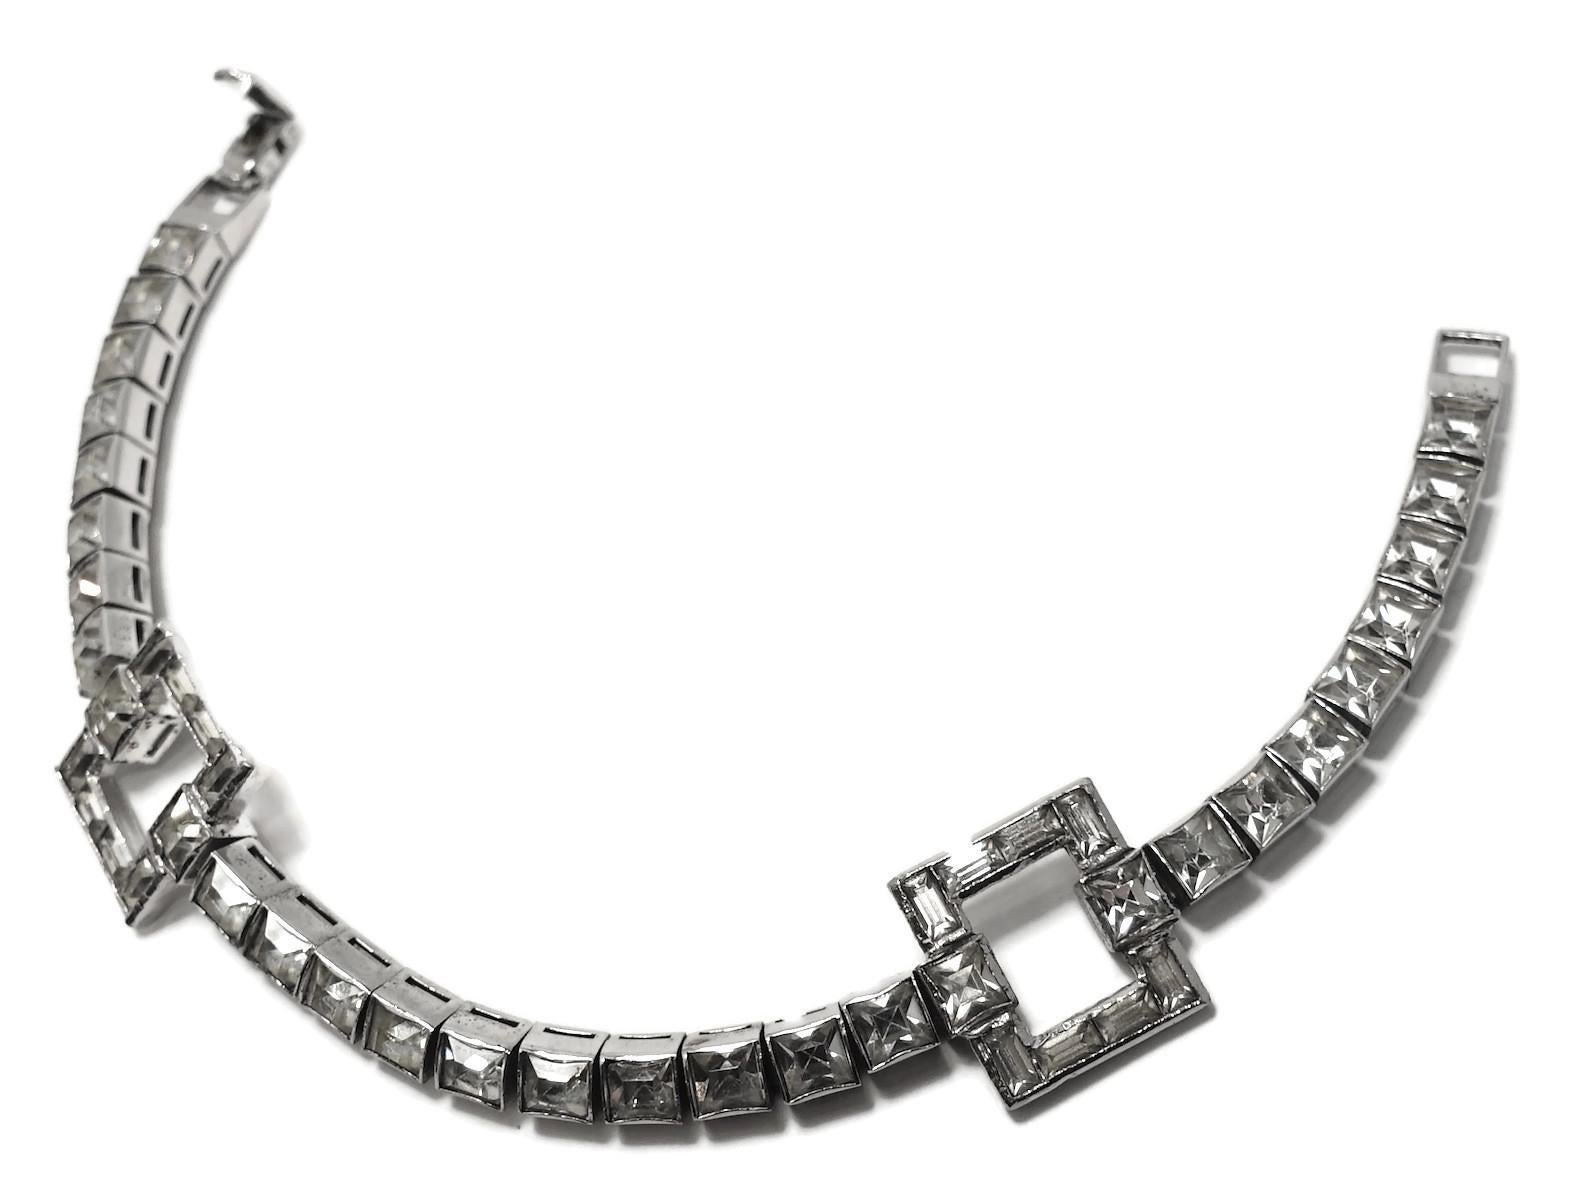 Vintage 1950s Retro Style Crystal Bracelet In Good Condition For Sale In New York, NY